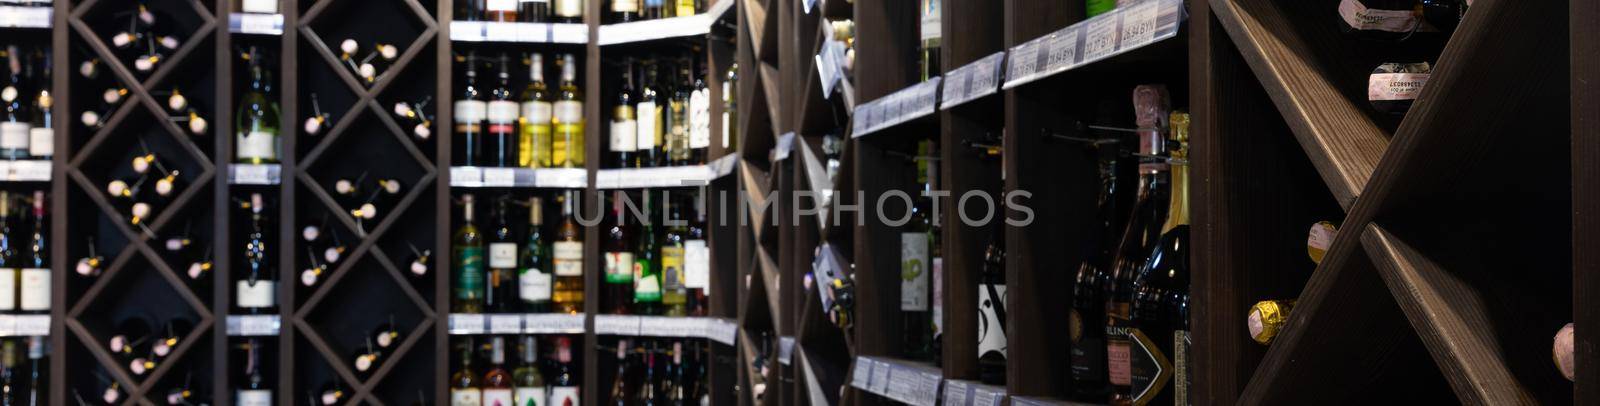 Minsk, Belarus - Dec 20, 2021: shelves of bottles of alcoholic beverages in a store selling wine and beer by TRMK